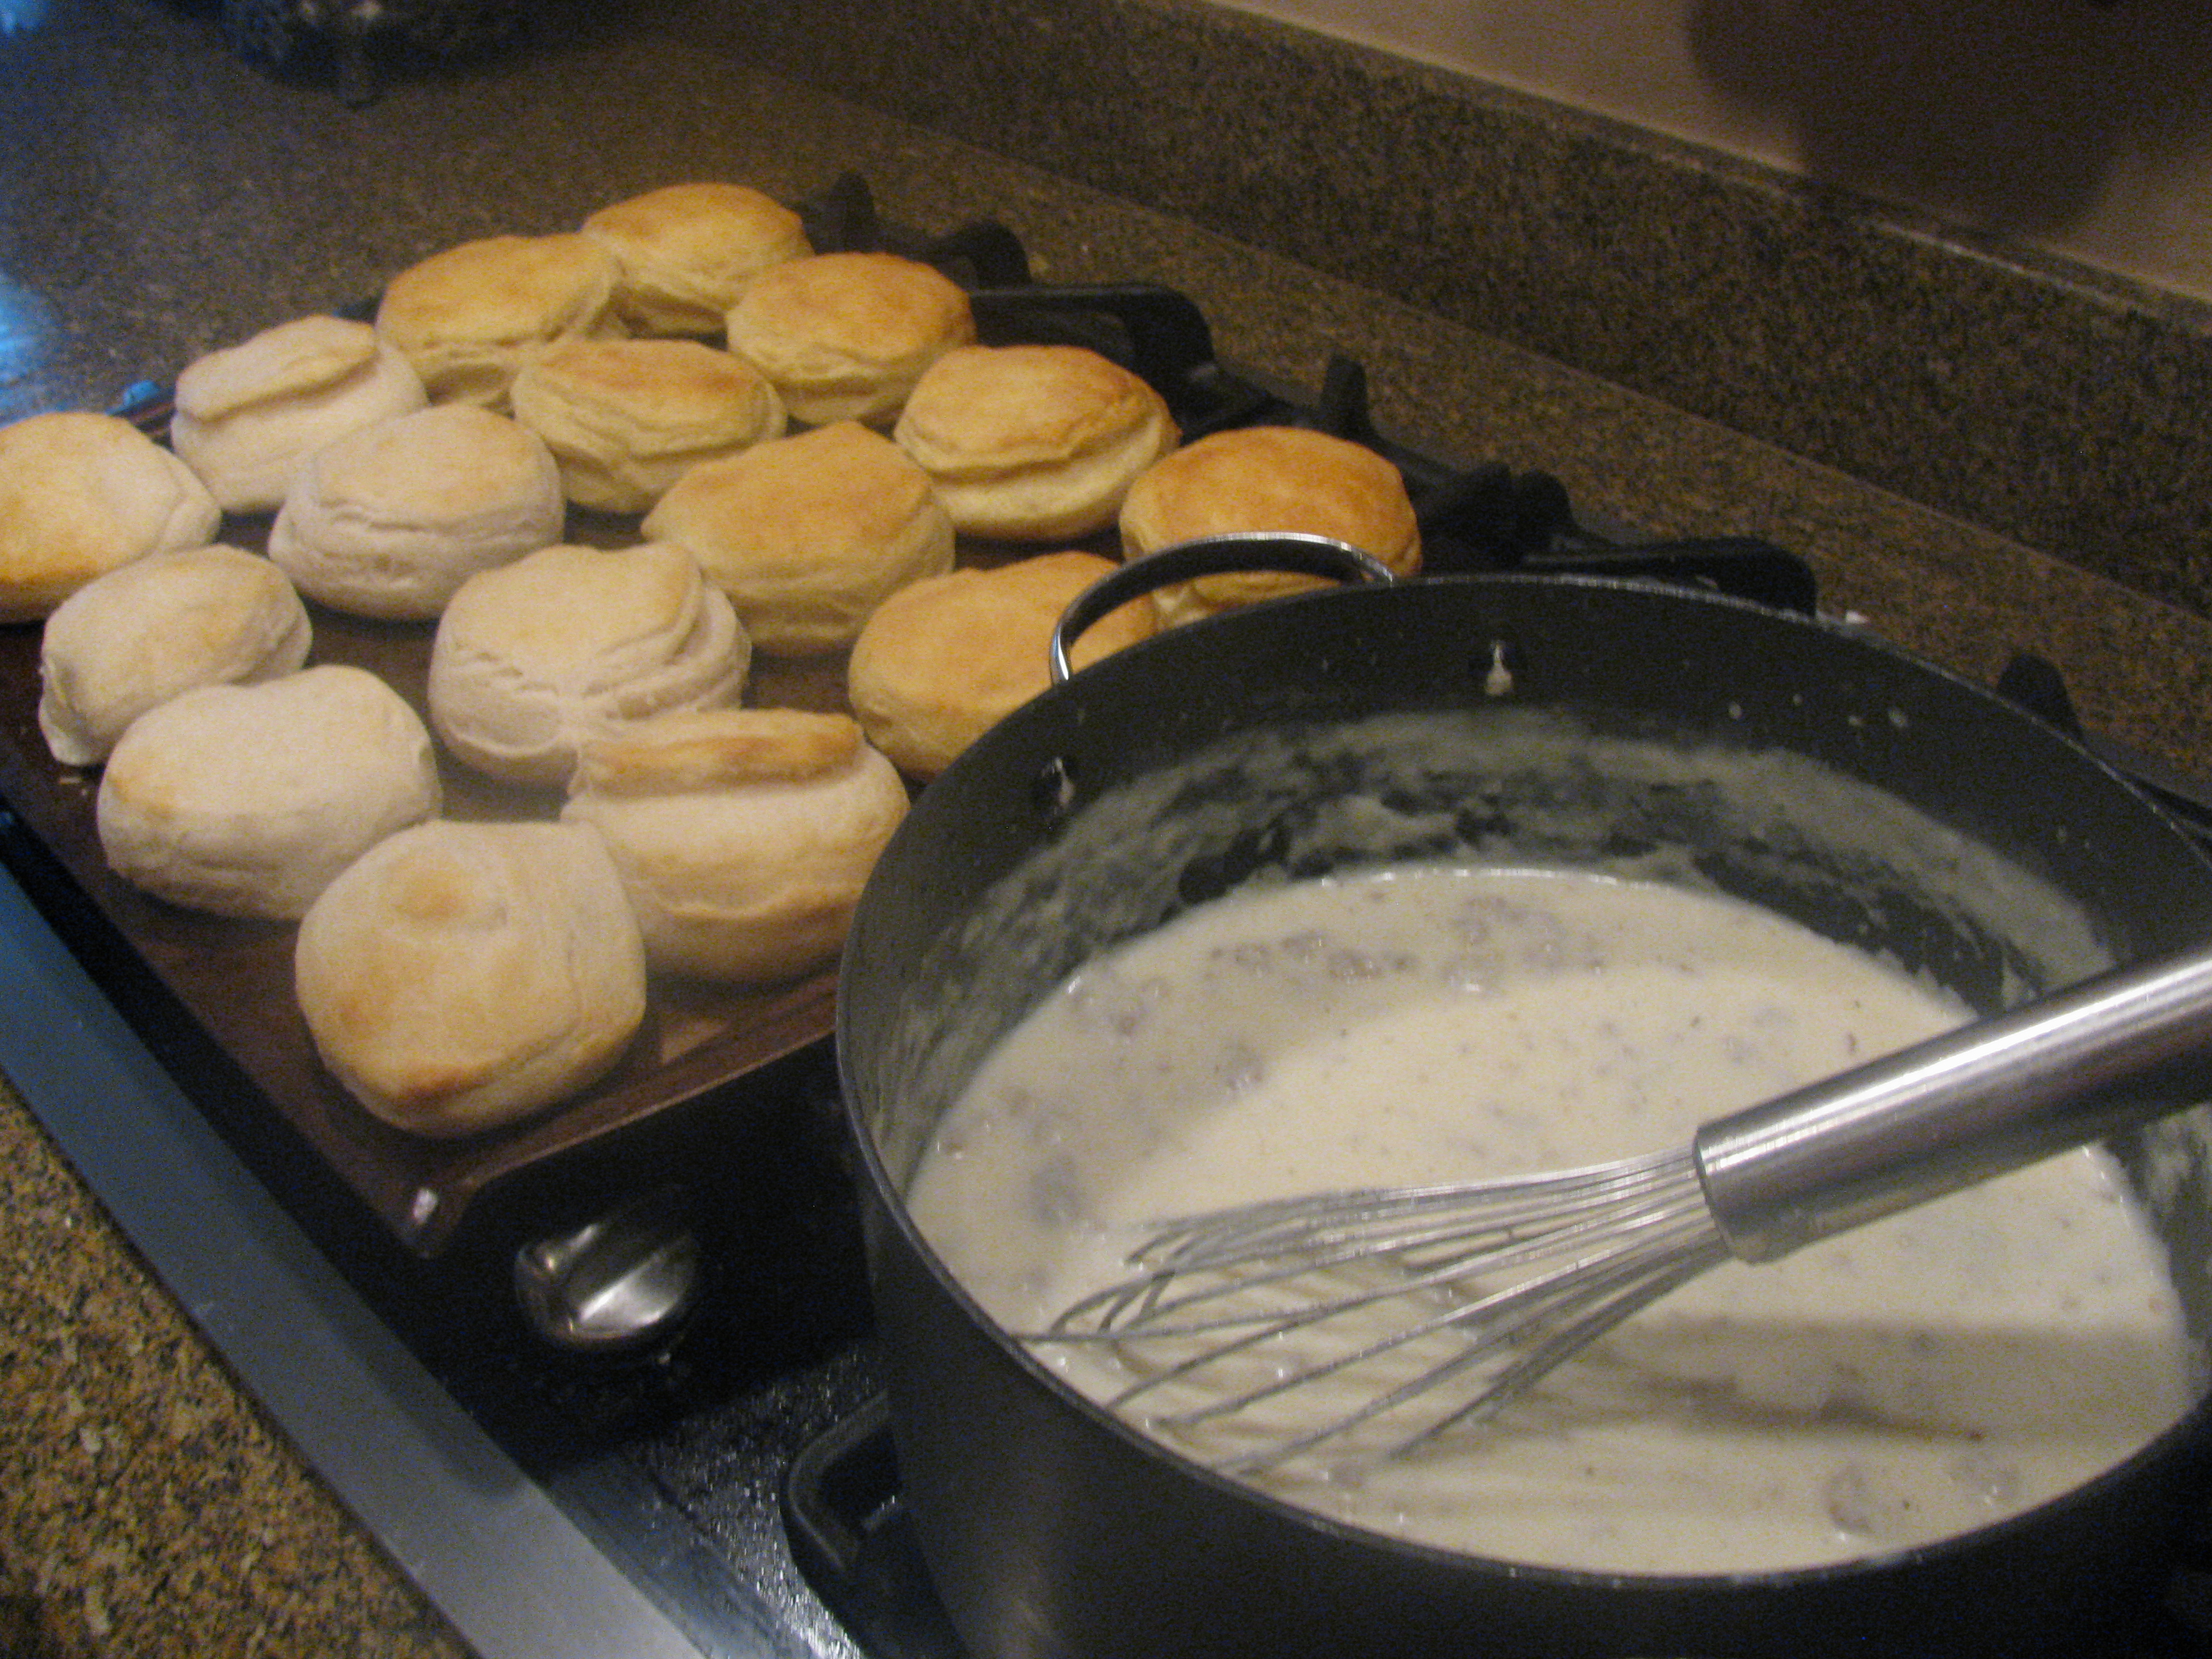 What are some good biscuit and gravy recipes?